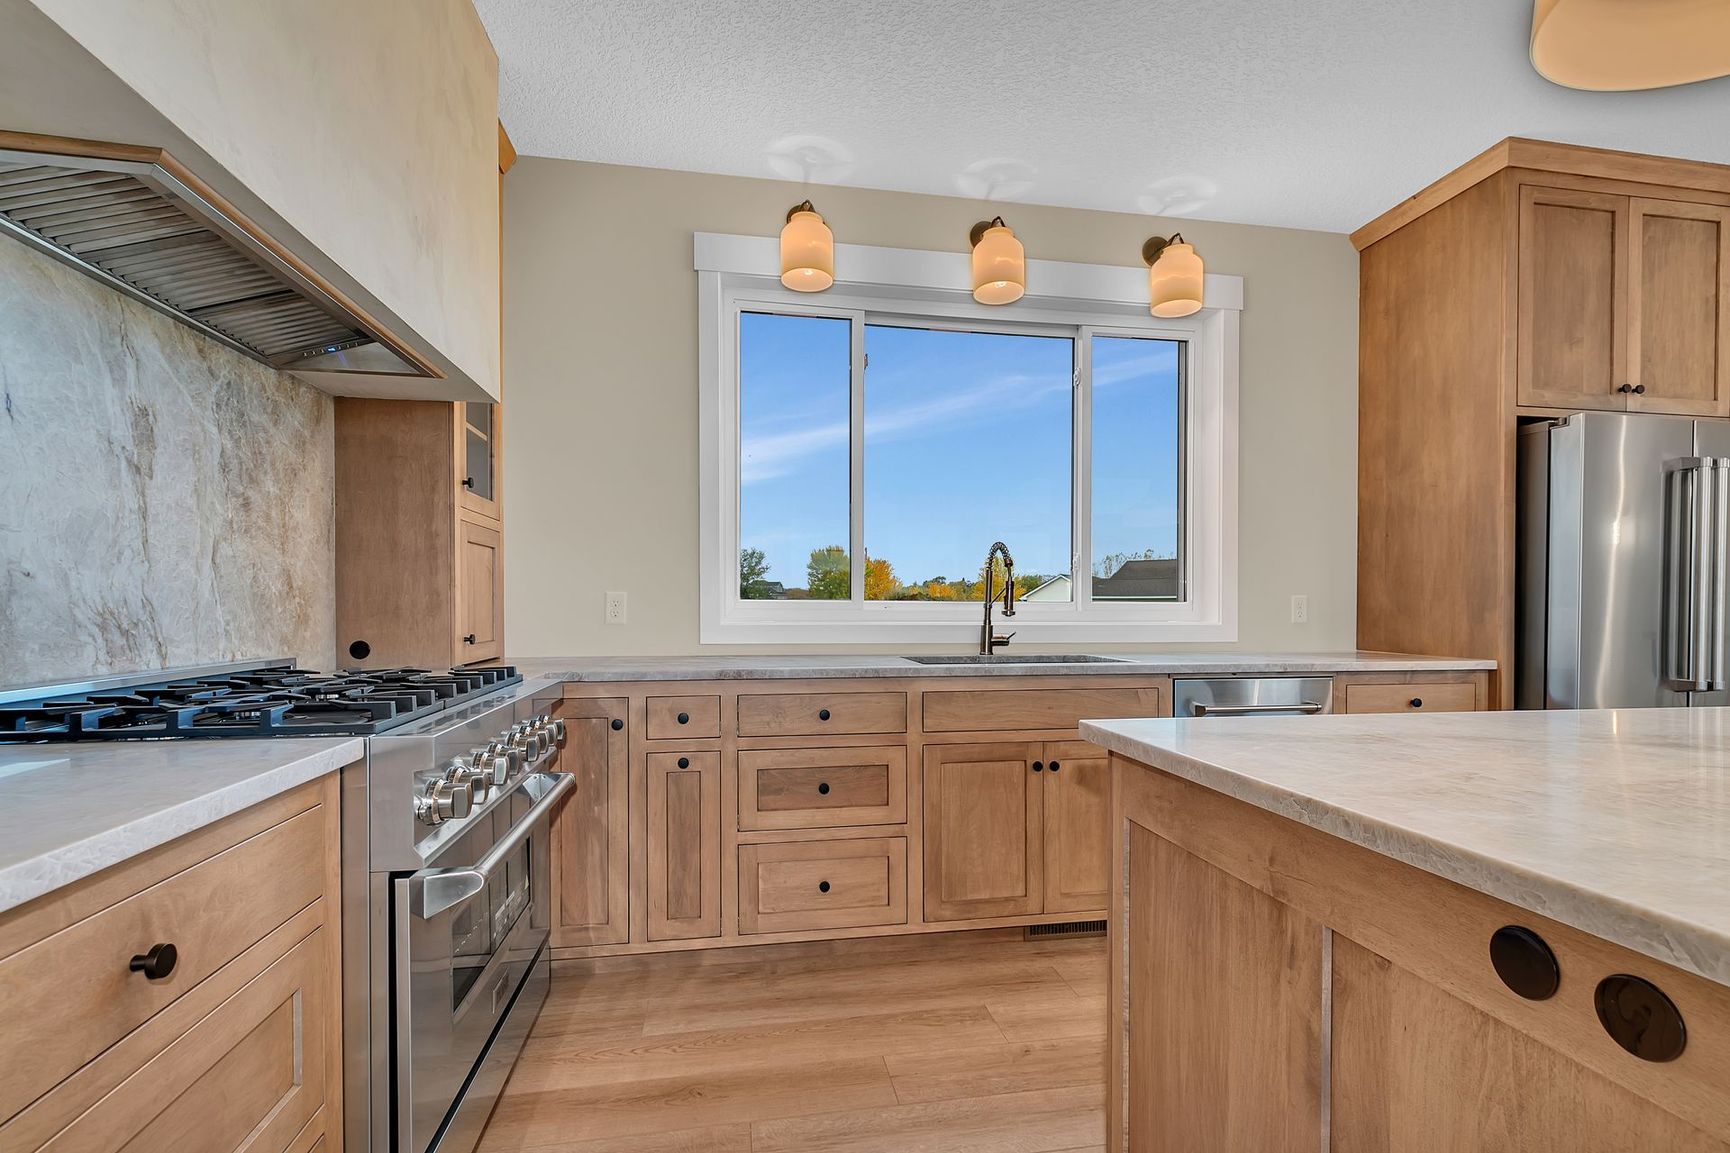 A kitchen with wooden cabinets , stainless steel appliances , and a large window.